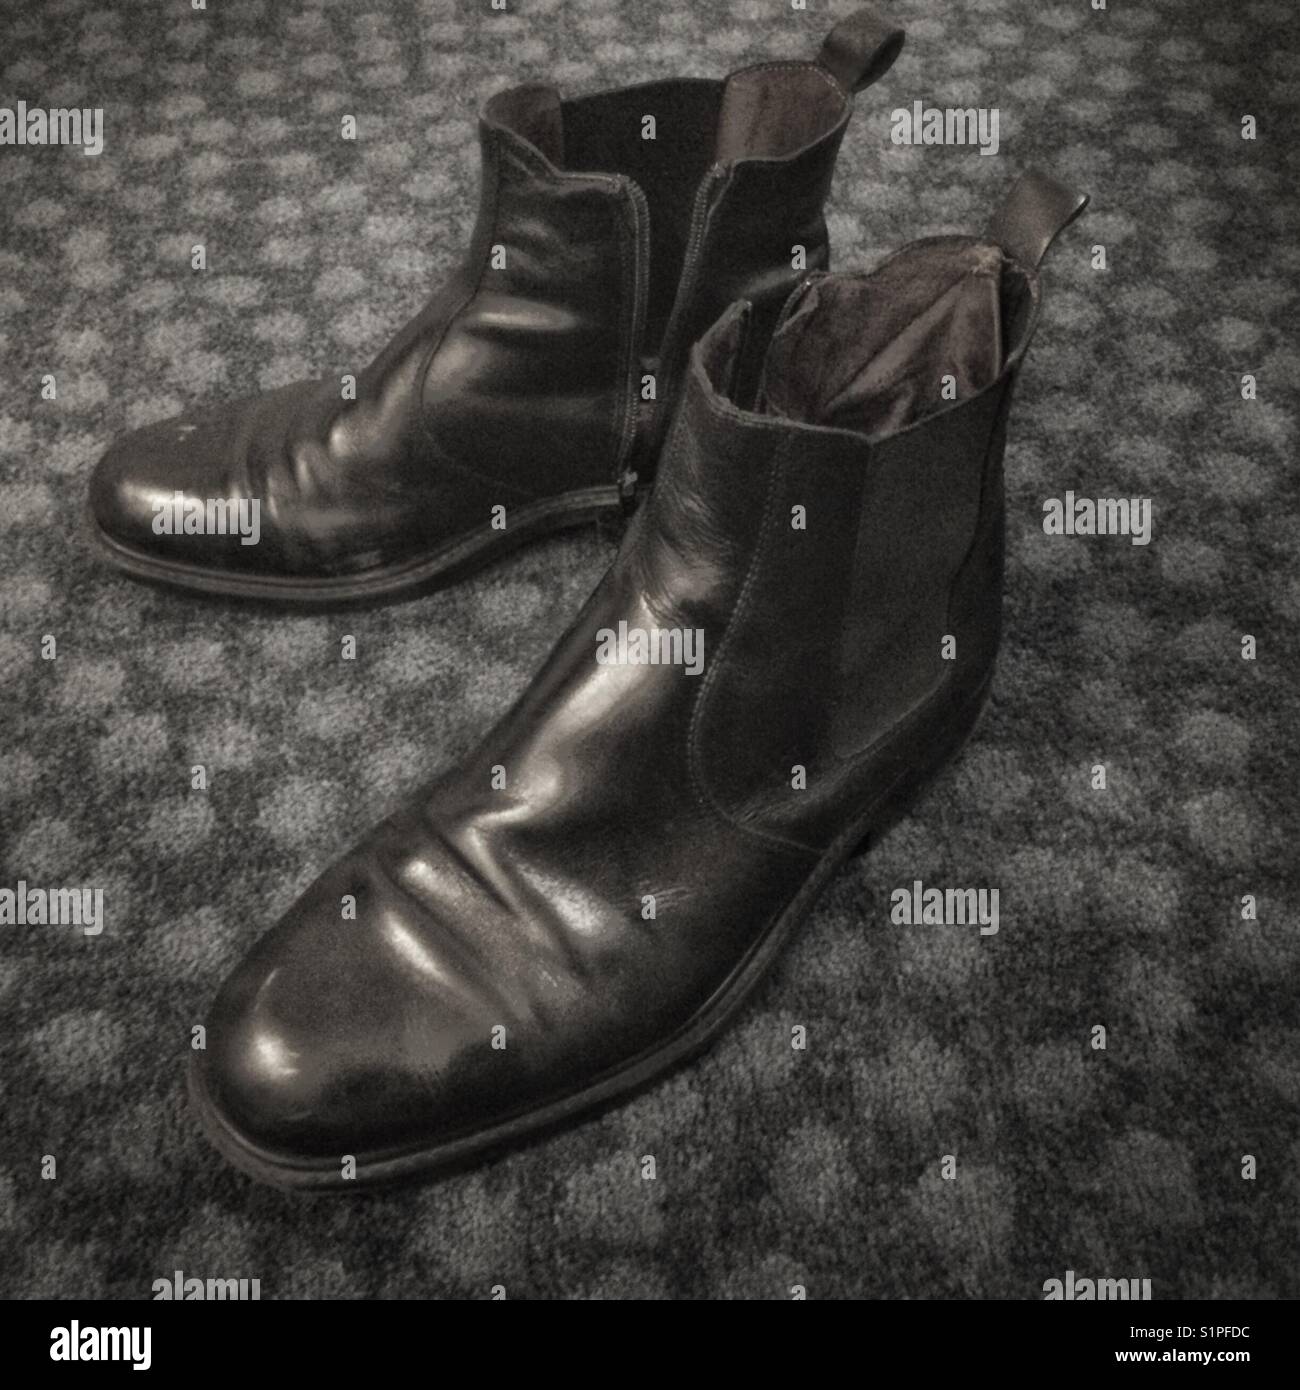 Worn black Chelsea style zip up men’s fashion boots on carpeted floor. Stock Photo